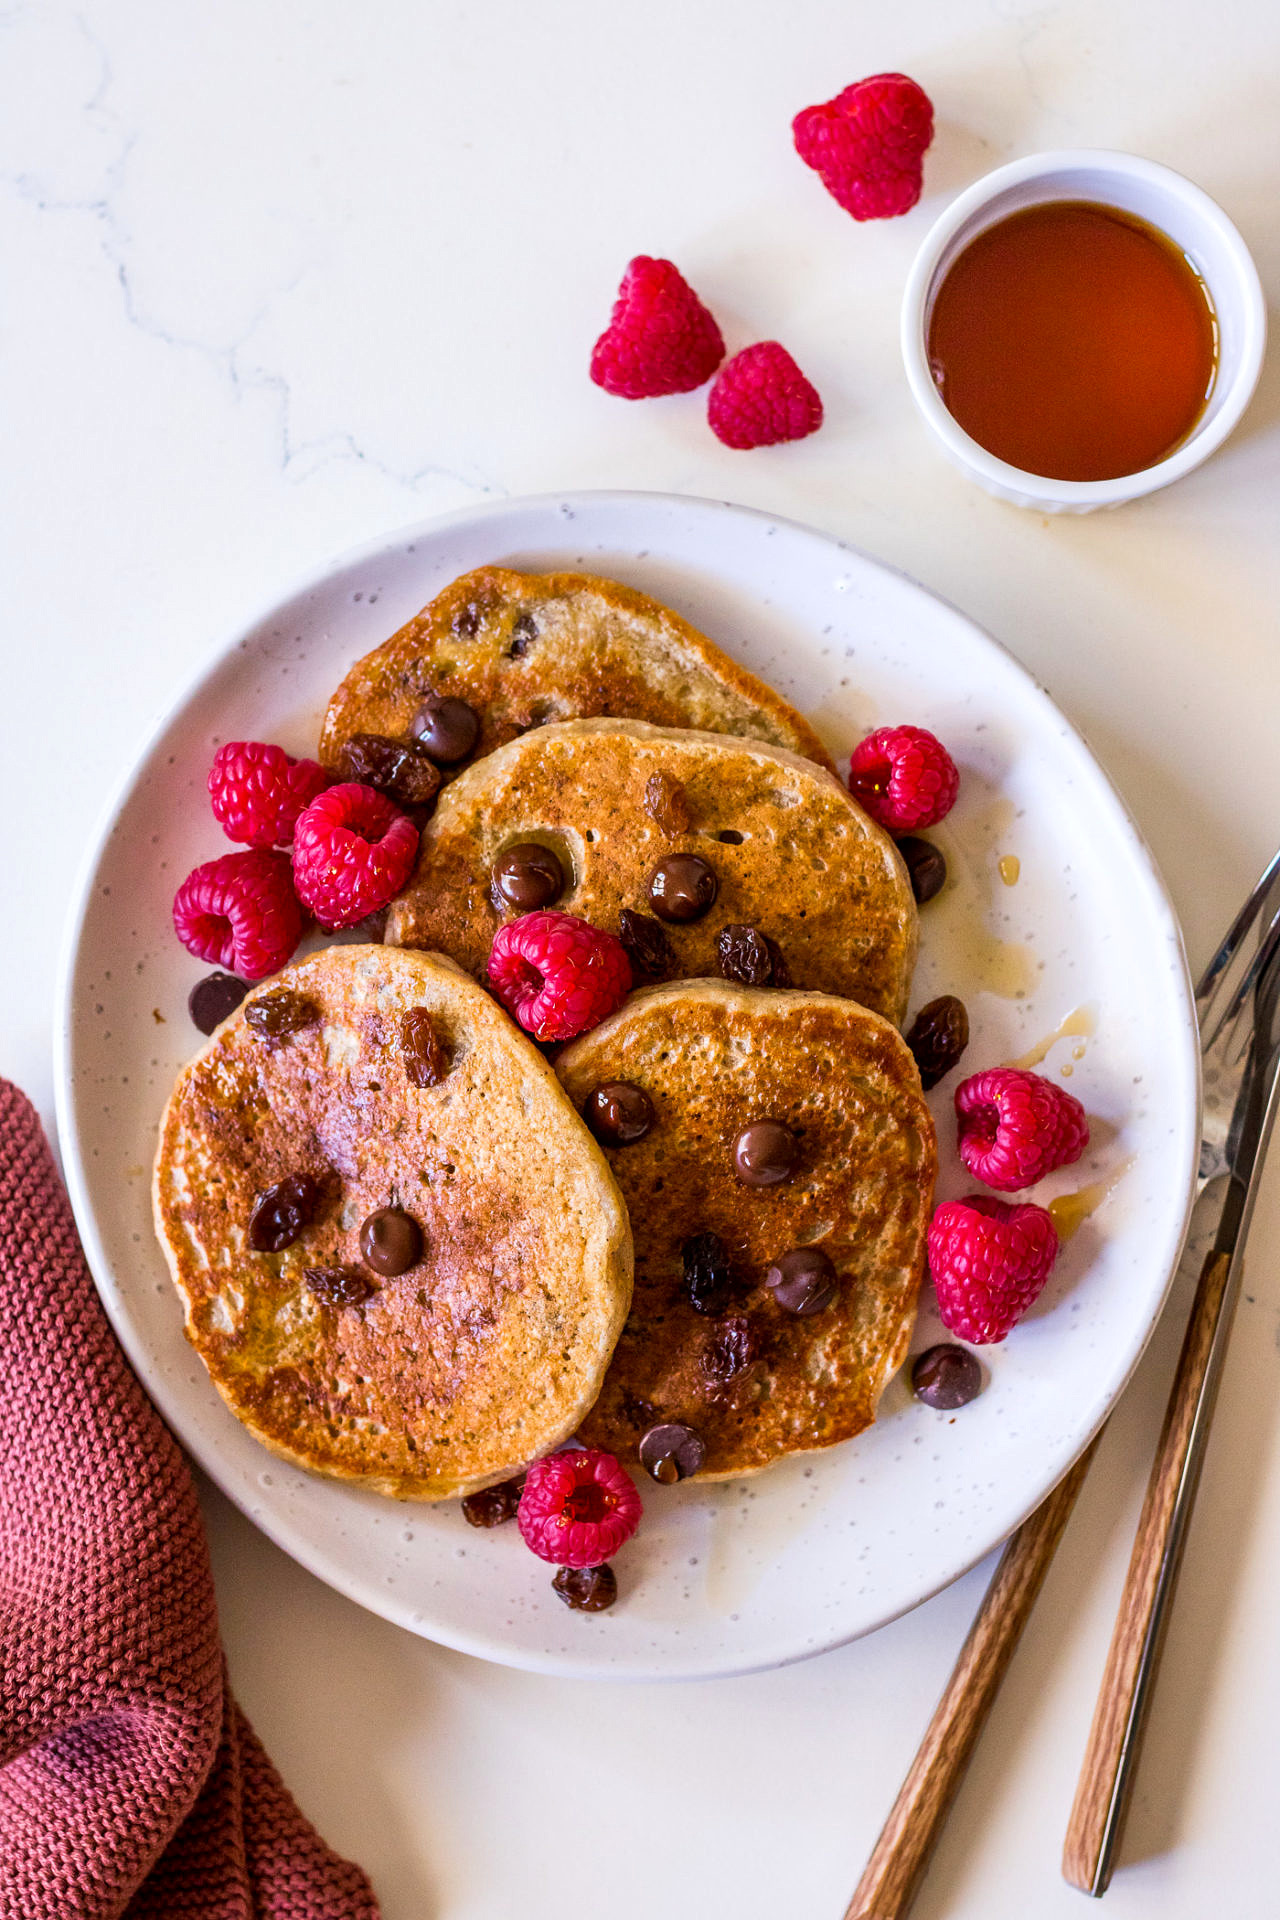 Top view of protein pancakes with raspberries, chocolate chips and maple syrup on a white plate